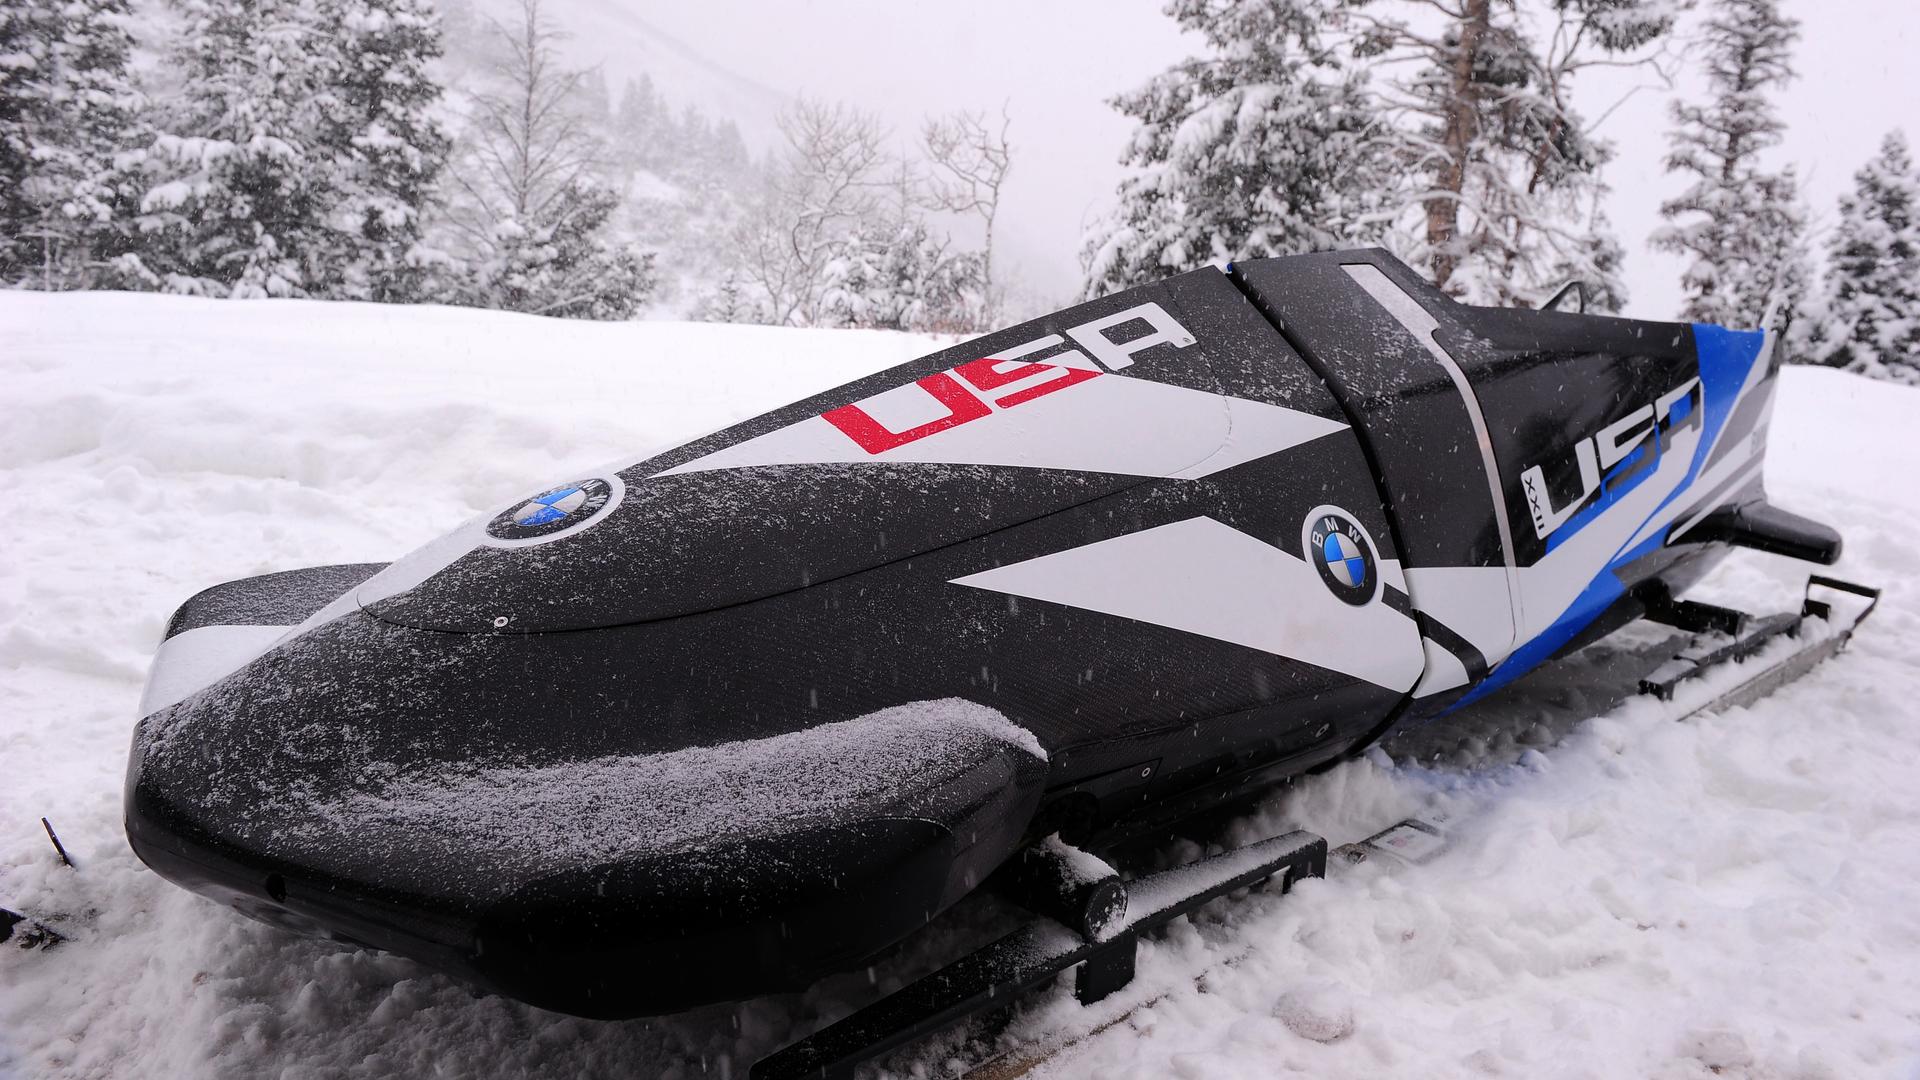 Team USA's new 2-man bobsled is set to make its Olympic debut this weekend in Sochi. 